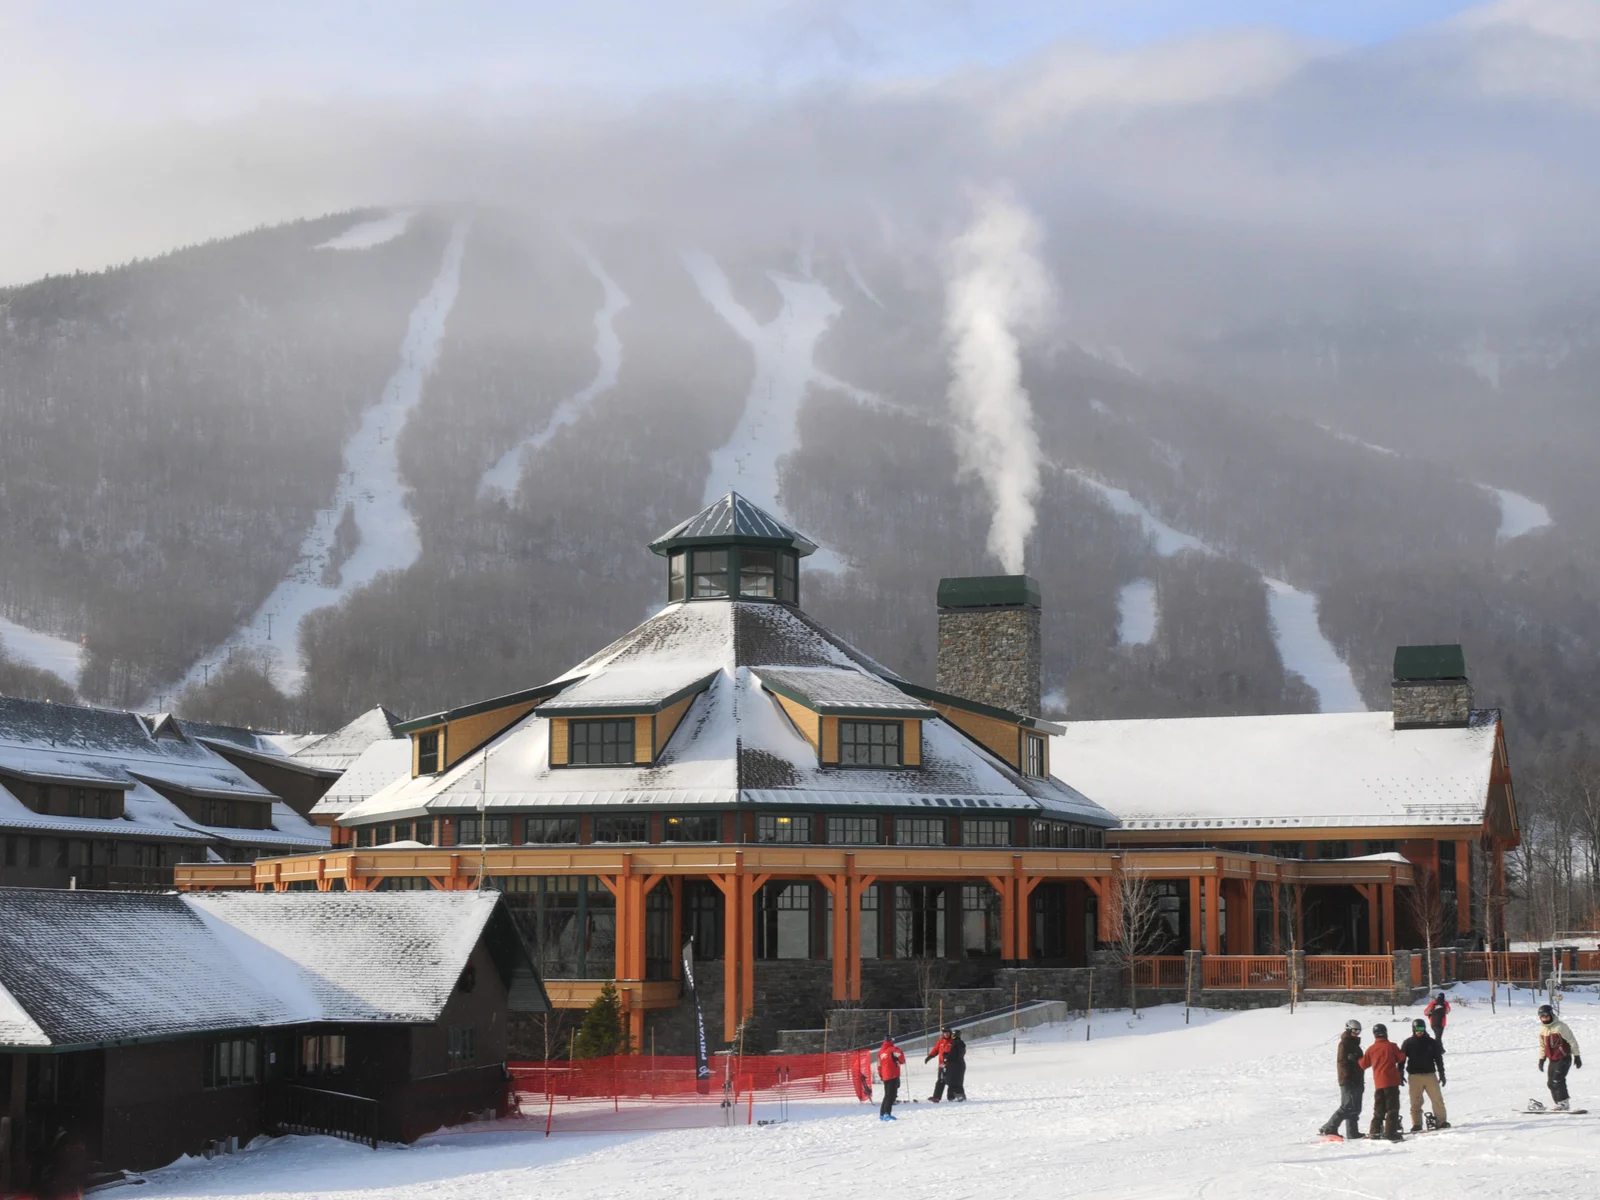 People skiing at the base of a mountain in Stowe, Vermont